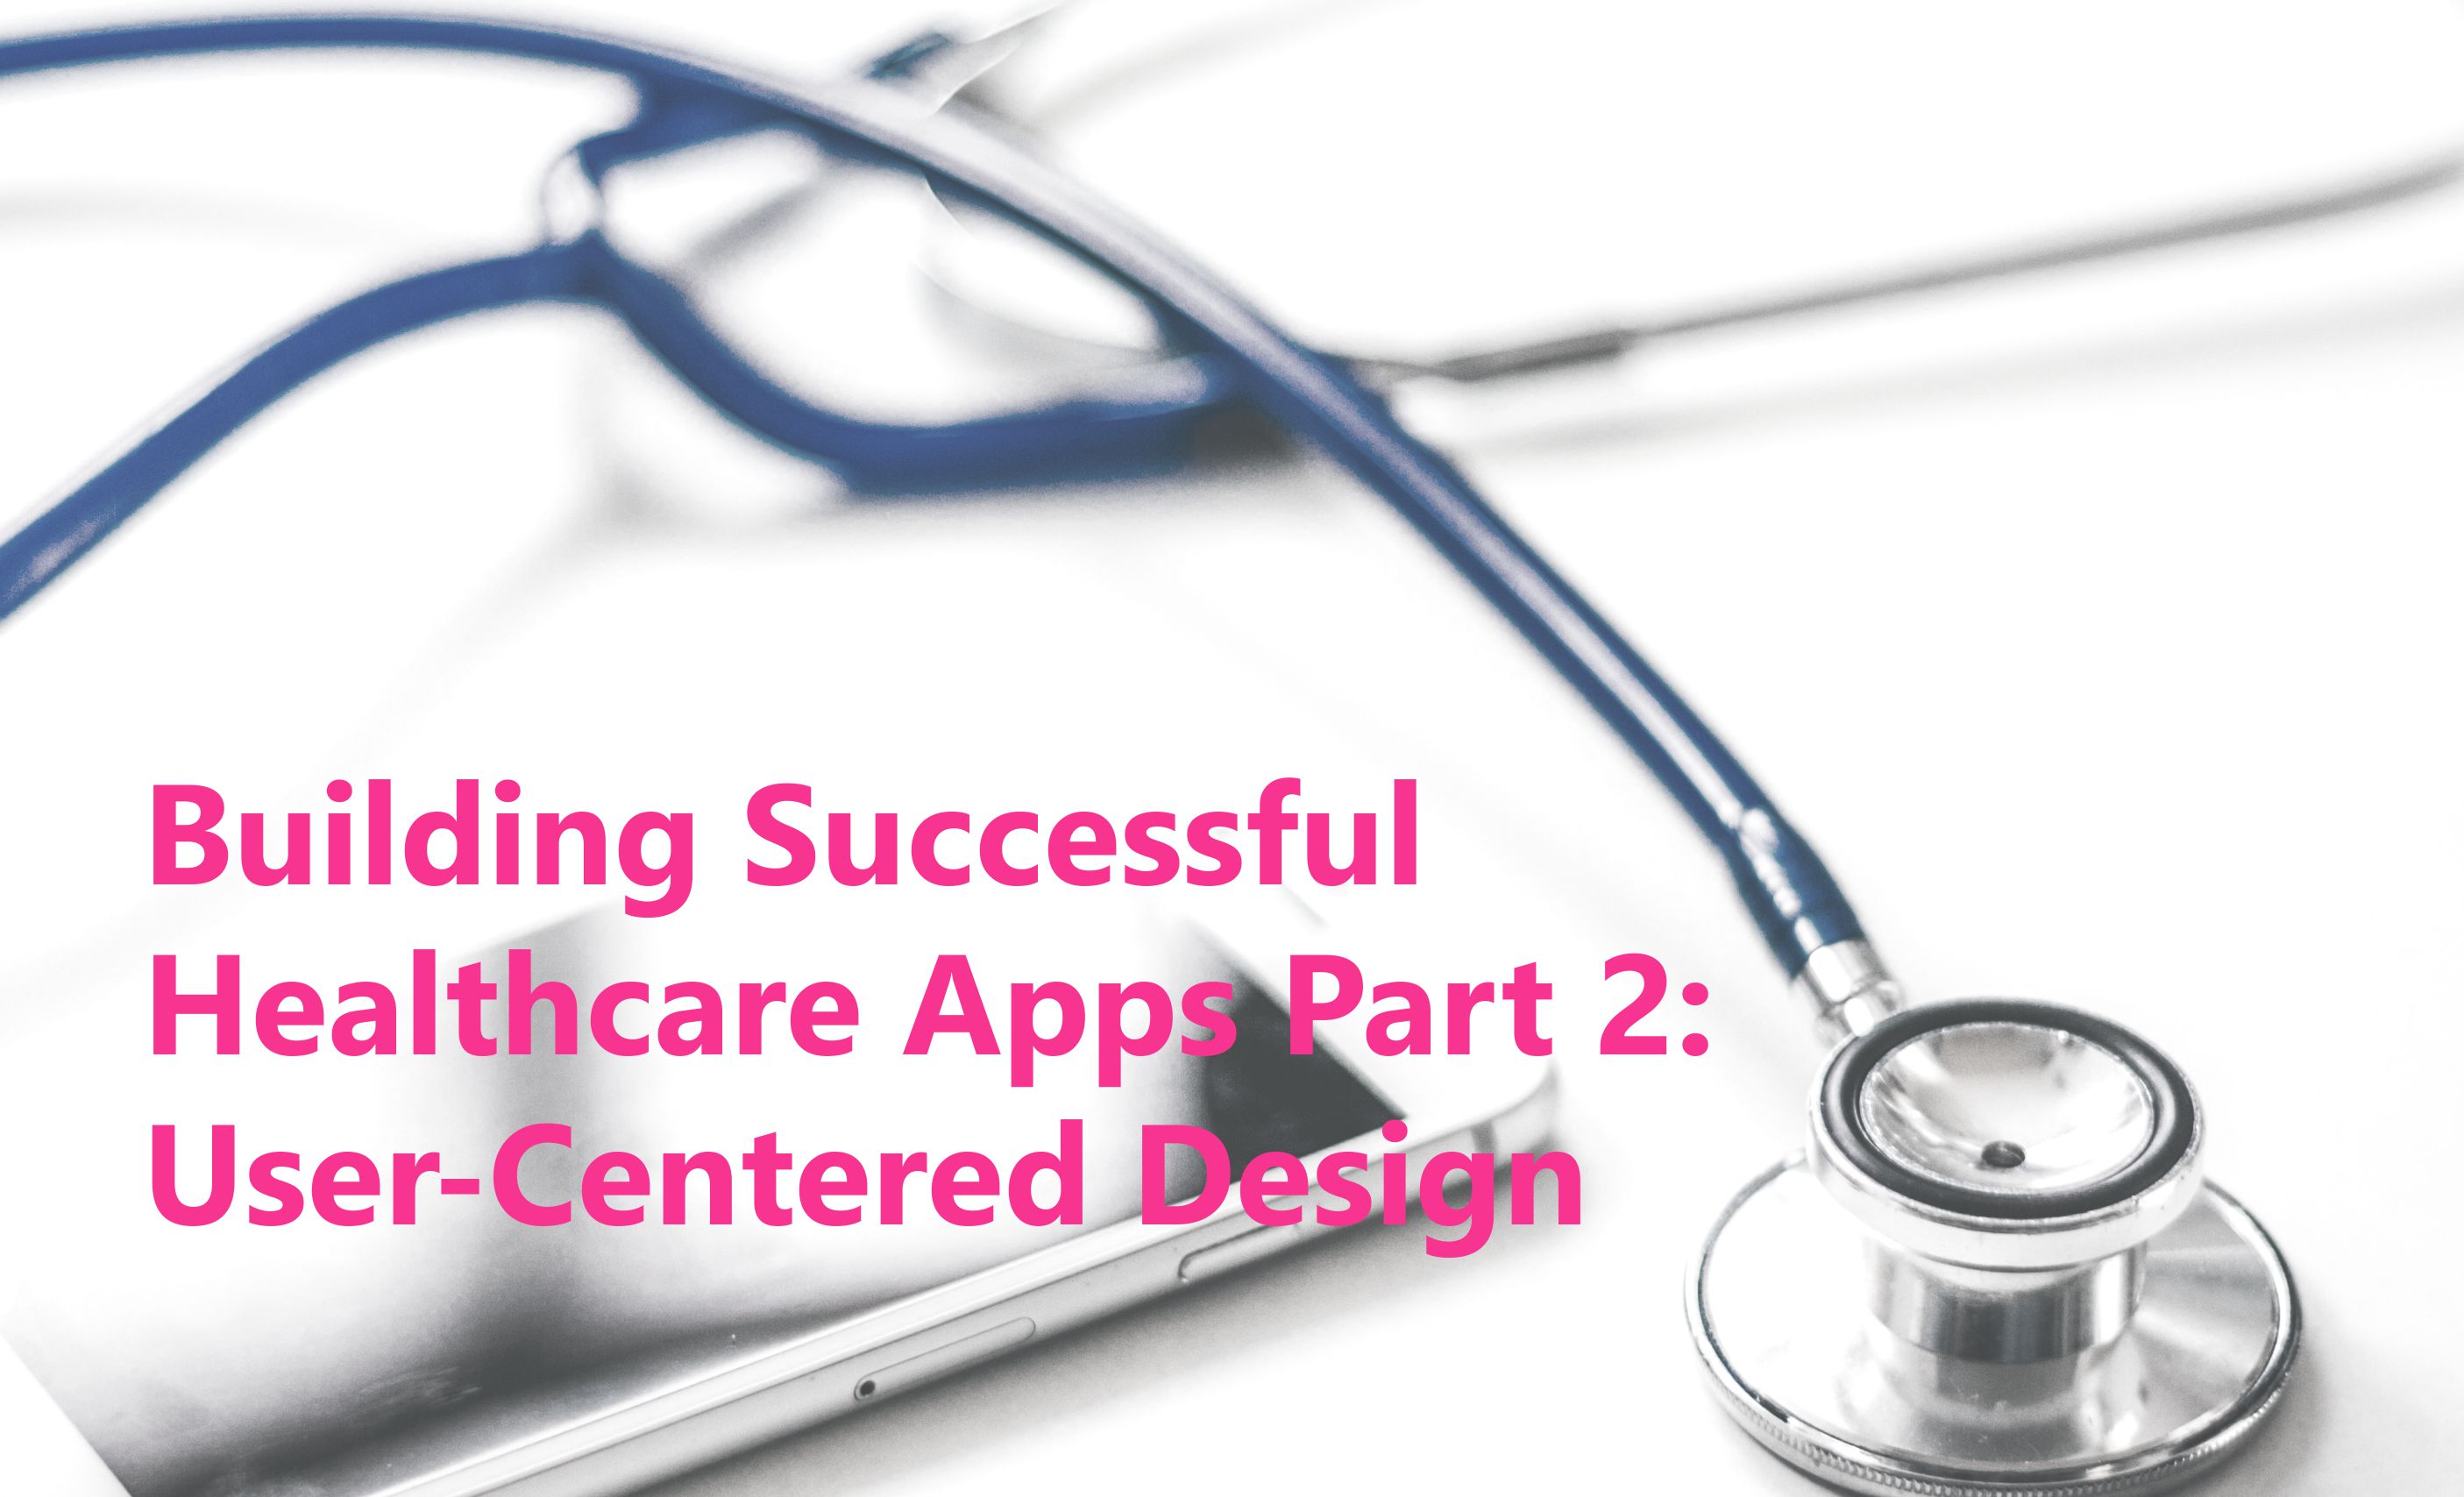 Building Successful Healthcare Apps Part 2: User-Centered Designs for Health